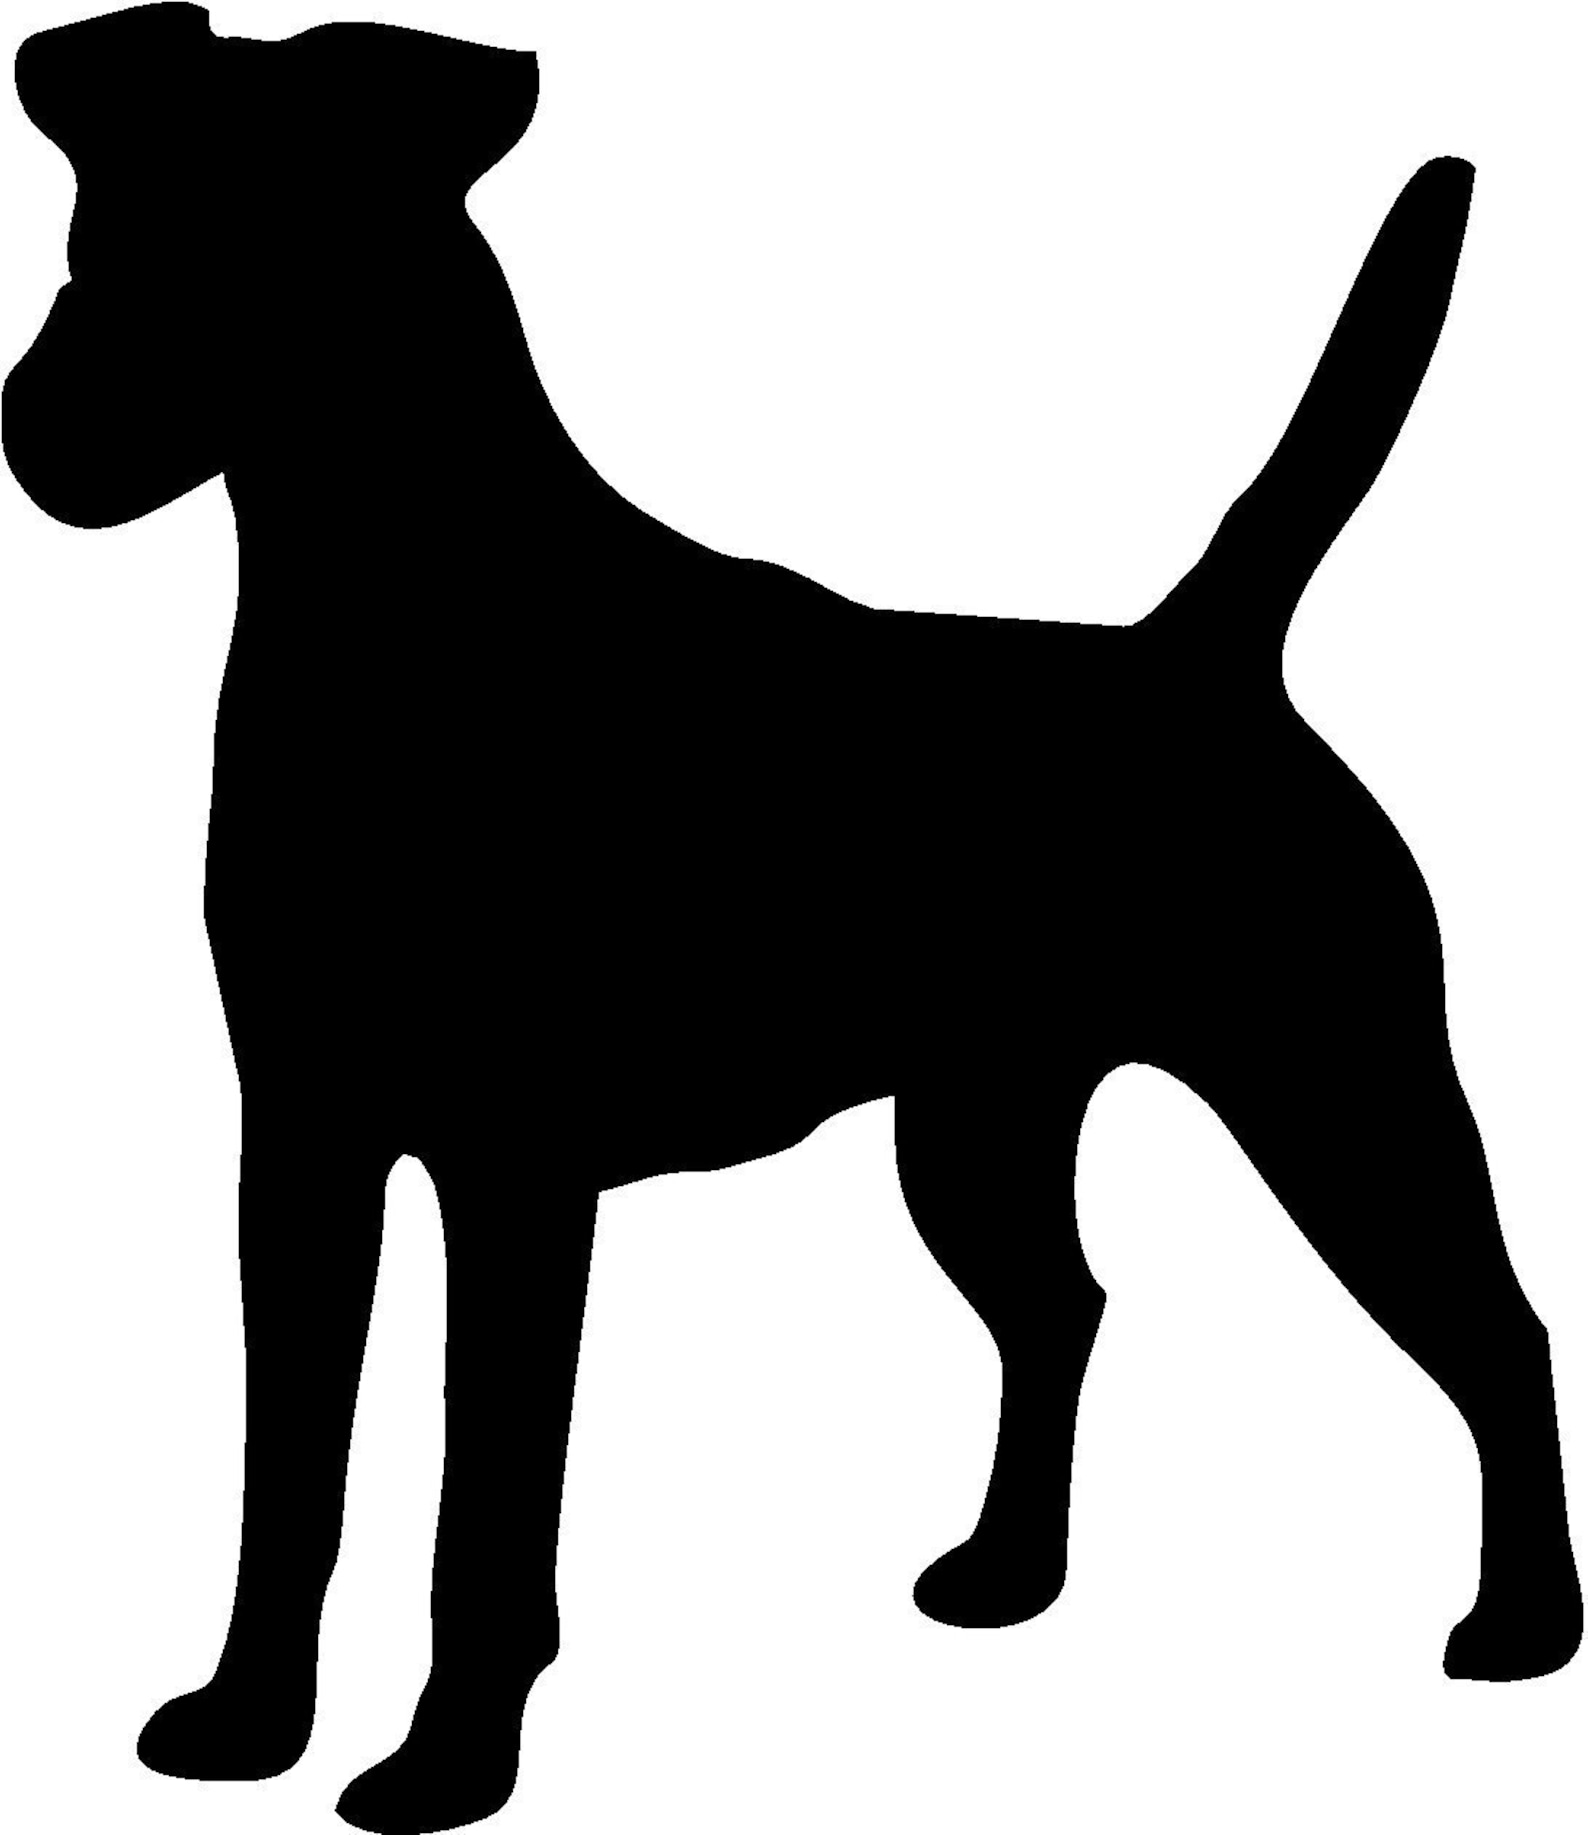 Smooth Fox Terrier Dog Vector Graphic SVG Silhouette | Etsy